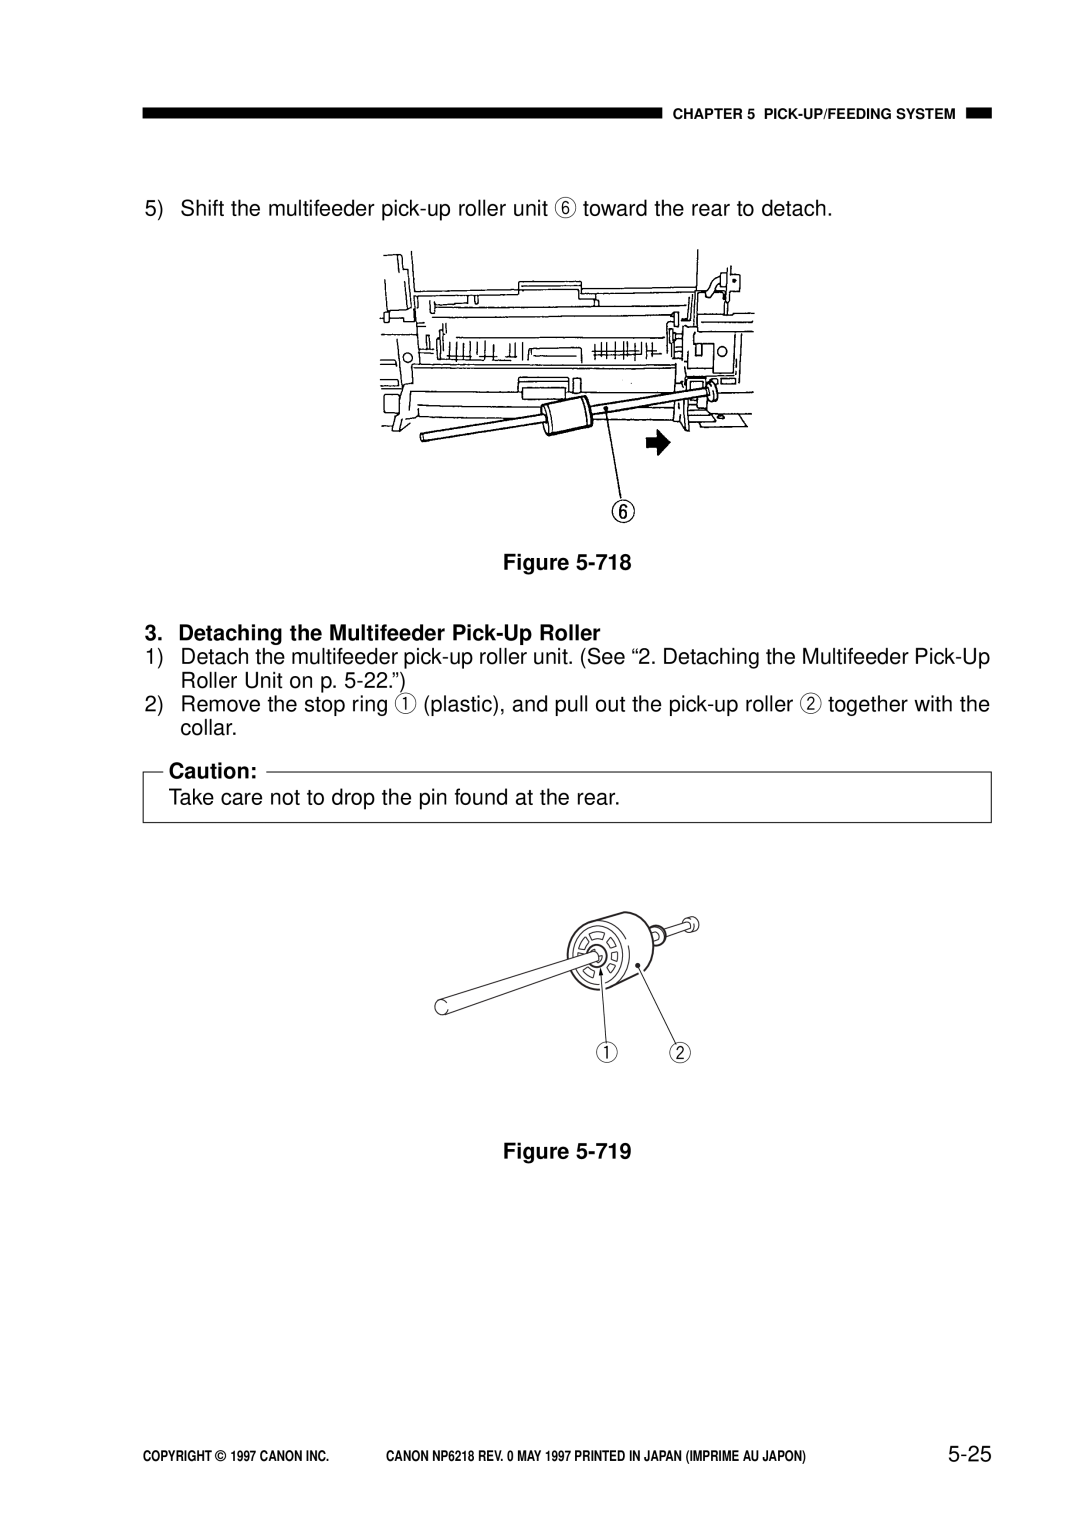 Canon NP6218, FY8-13EX-000 service manual Detaching the Multifeeder Pick-Up Roller, 5-25 